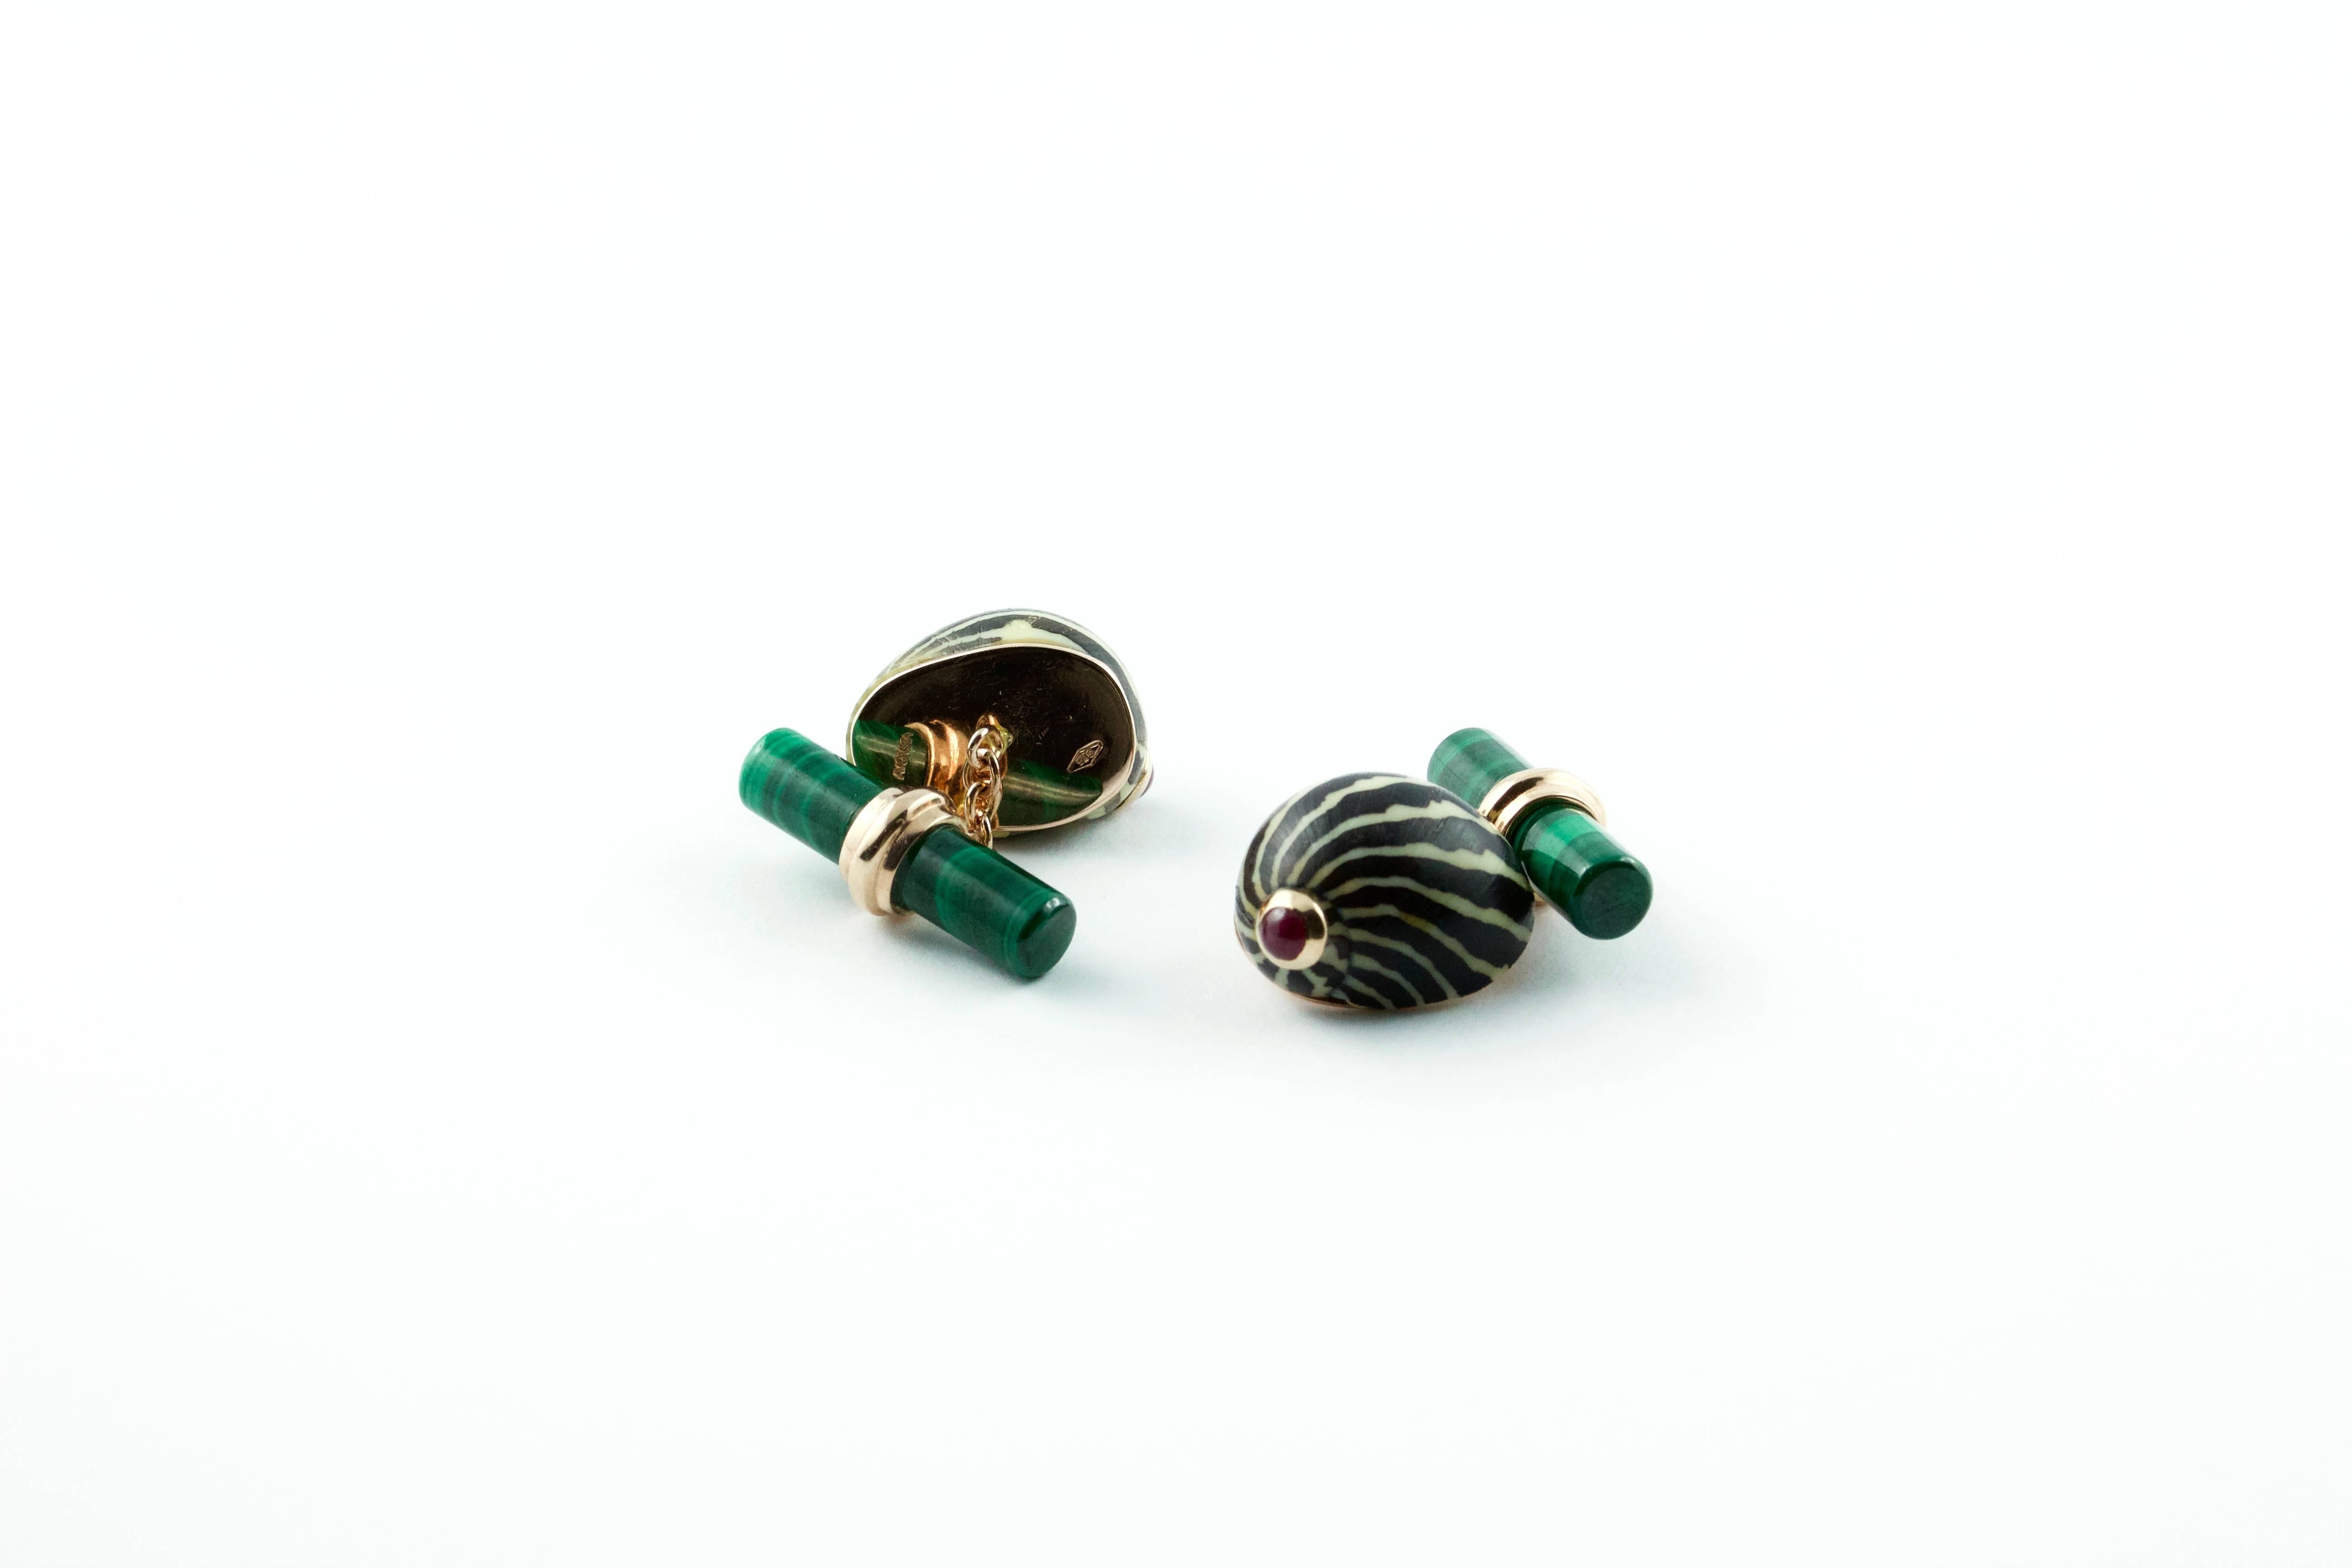 These striking cufflinks feature a front face made of a Zebra Nerita shell and the toggle is in malachite. 
The shell is golden-brown in color and has black stripes running back from the aperture to the apex creating a zebra-like look.
The natural